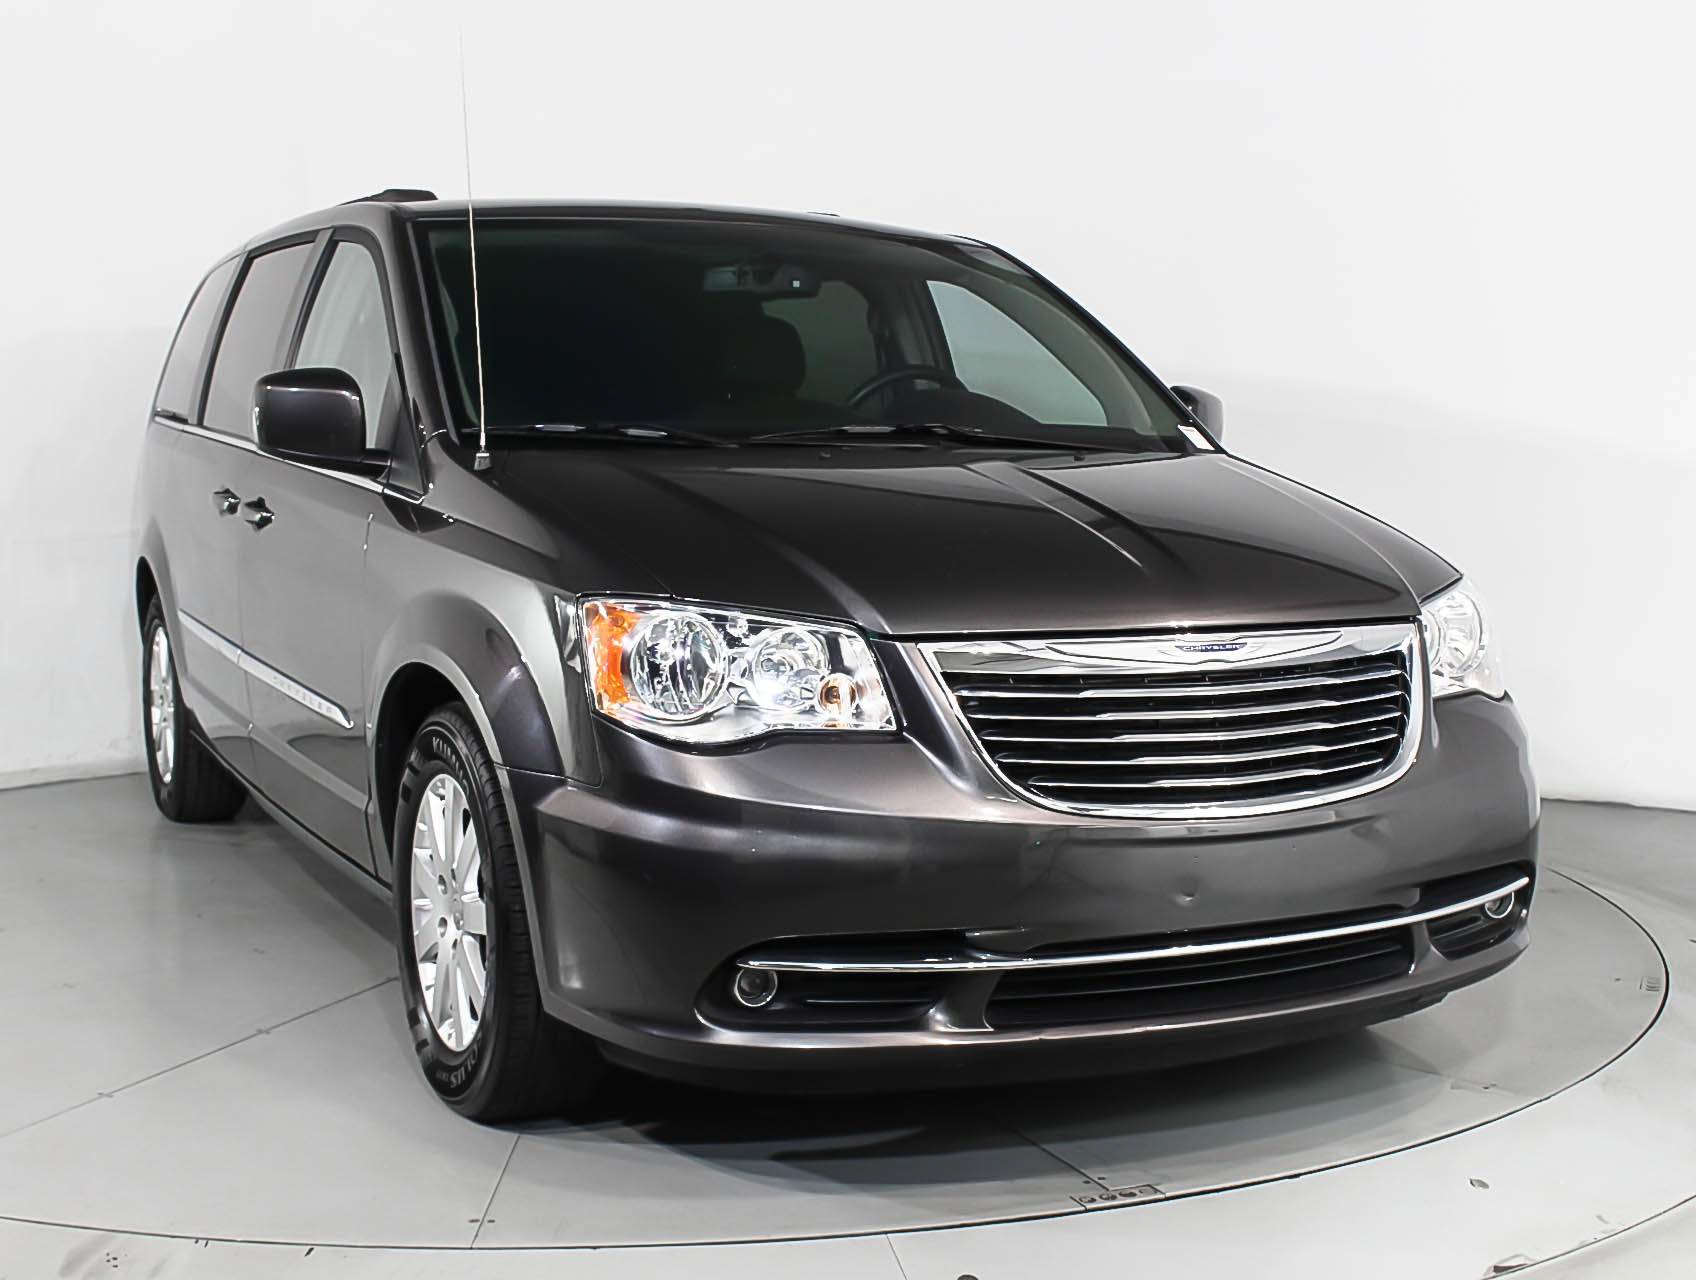 Florida Fine Cars - Used CHRYSLER TOWN & COUNTRY 2016 MIAMI TOURING